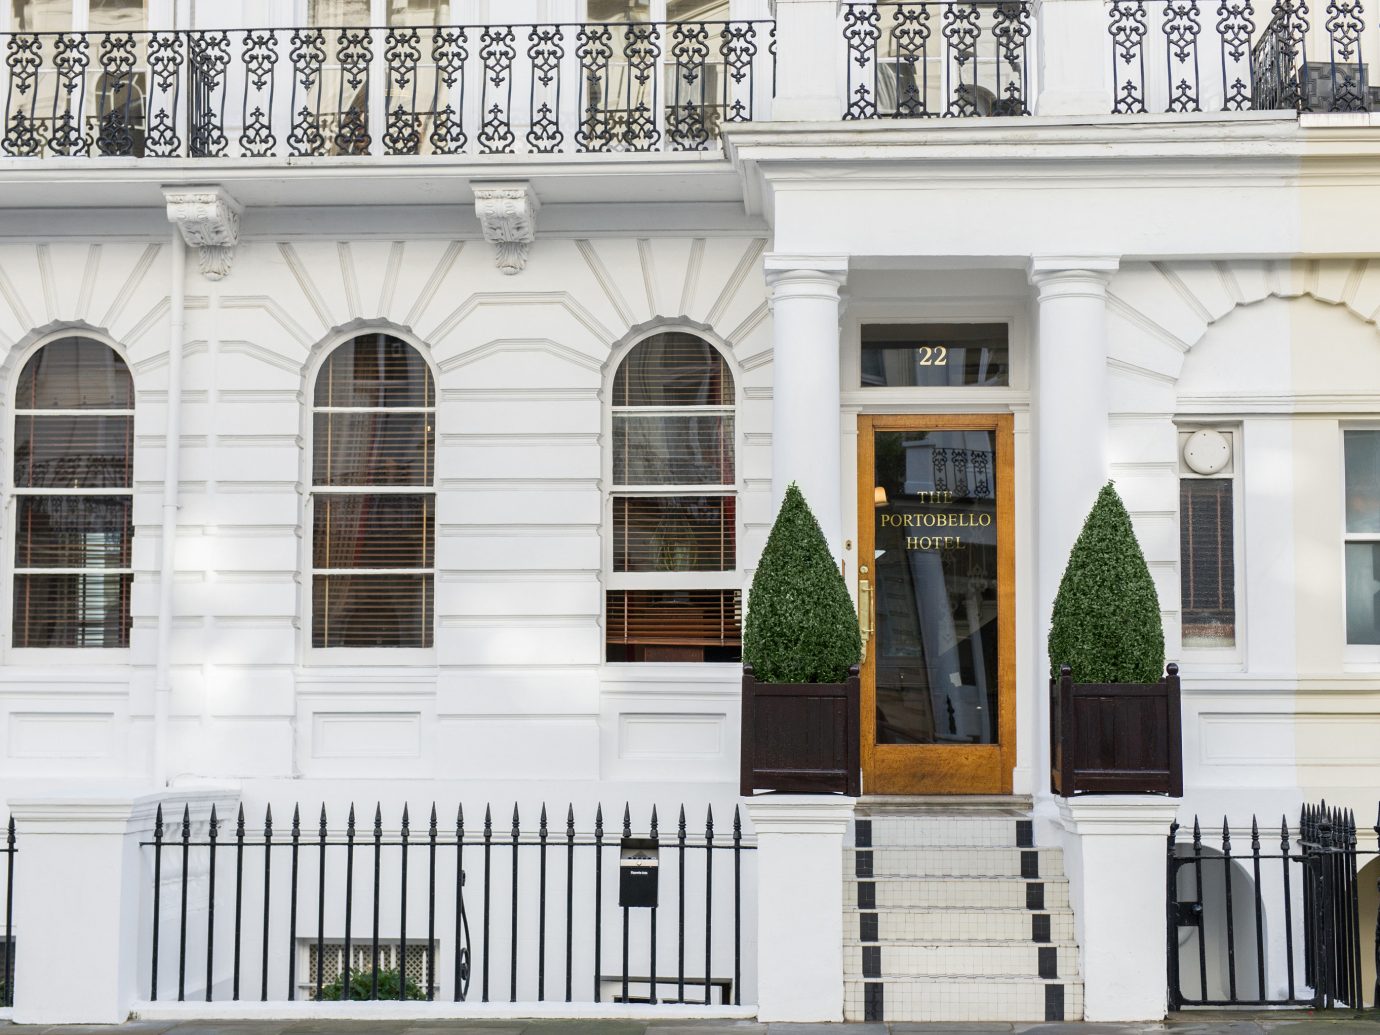 Boutique Hotels London Romantic Hotels outdoor building property Architecture house facade home window estate interior design palace window covering door condominium baluster mansion stone